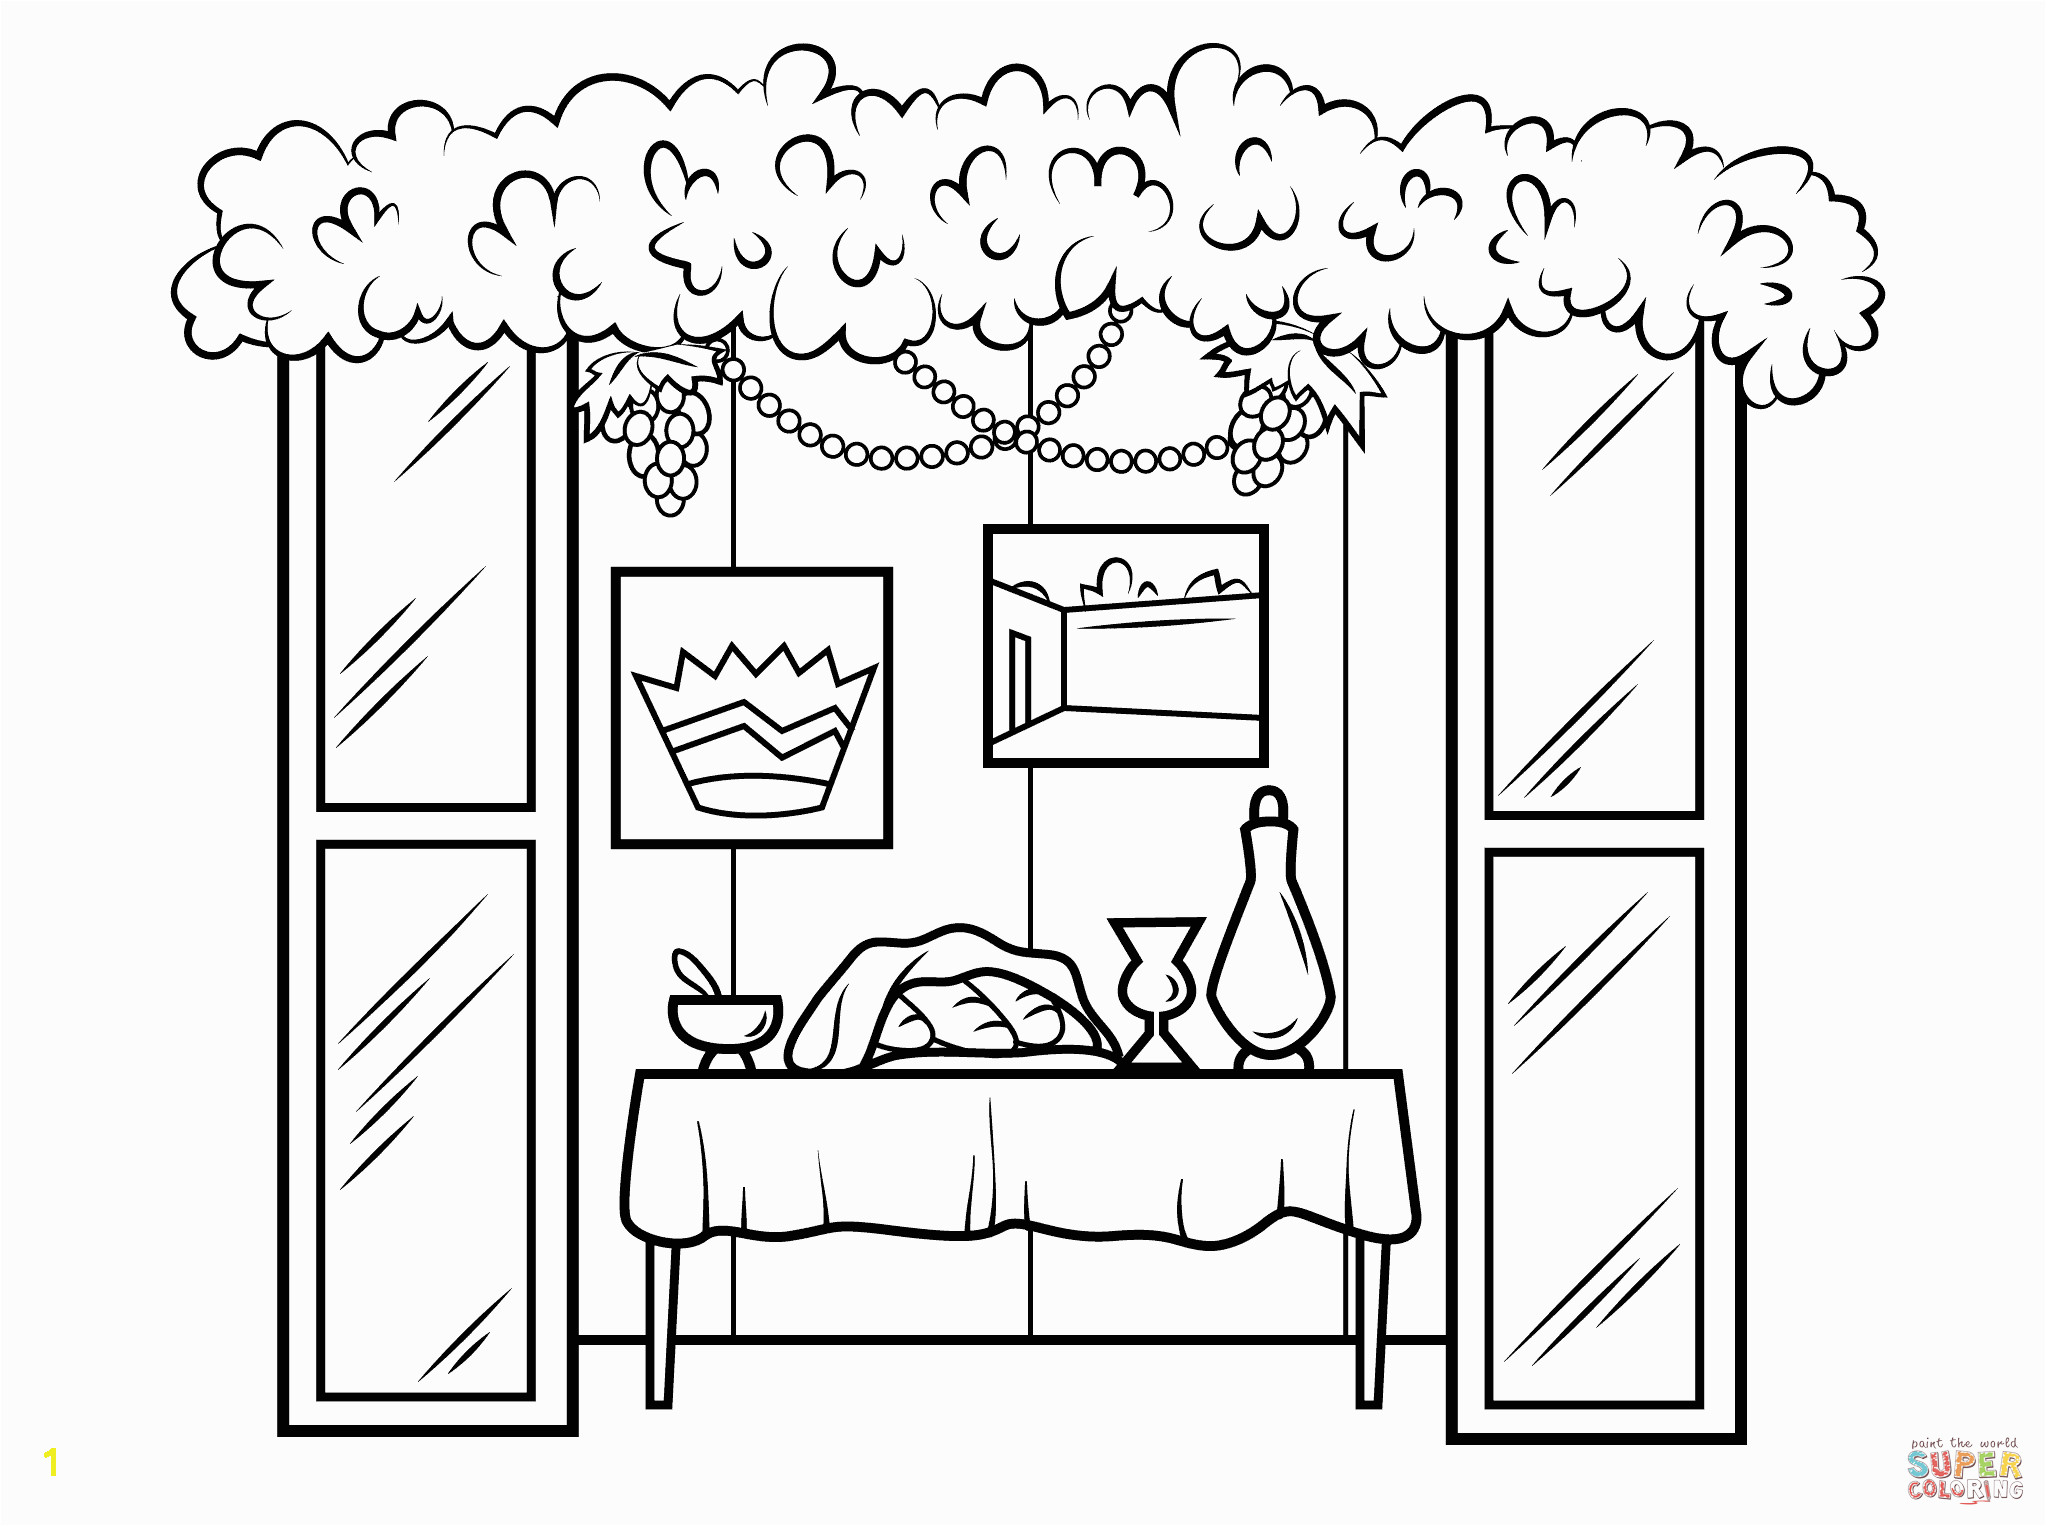 Heathermarxgallery Sukkah Coloring Pages Building A Sukkah Coloring Page Sukkot Pinterest